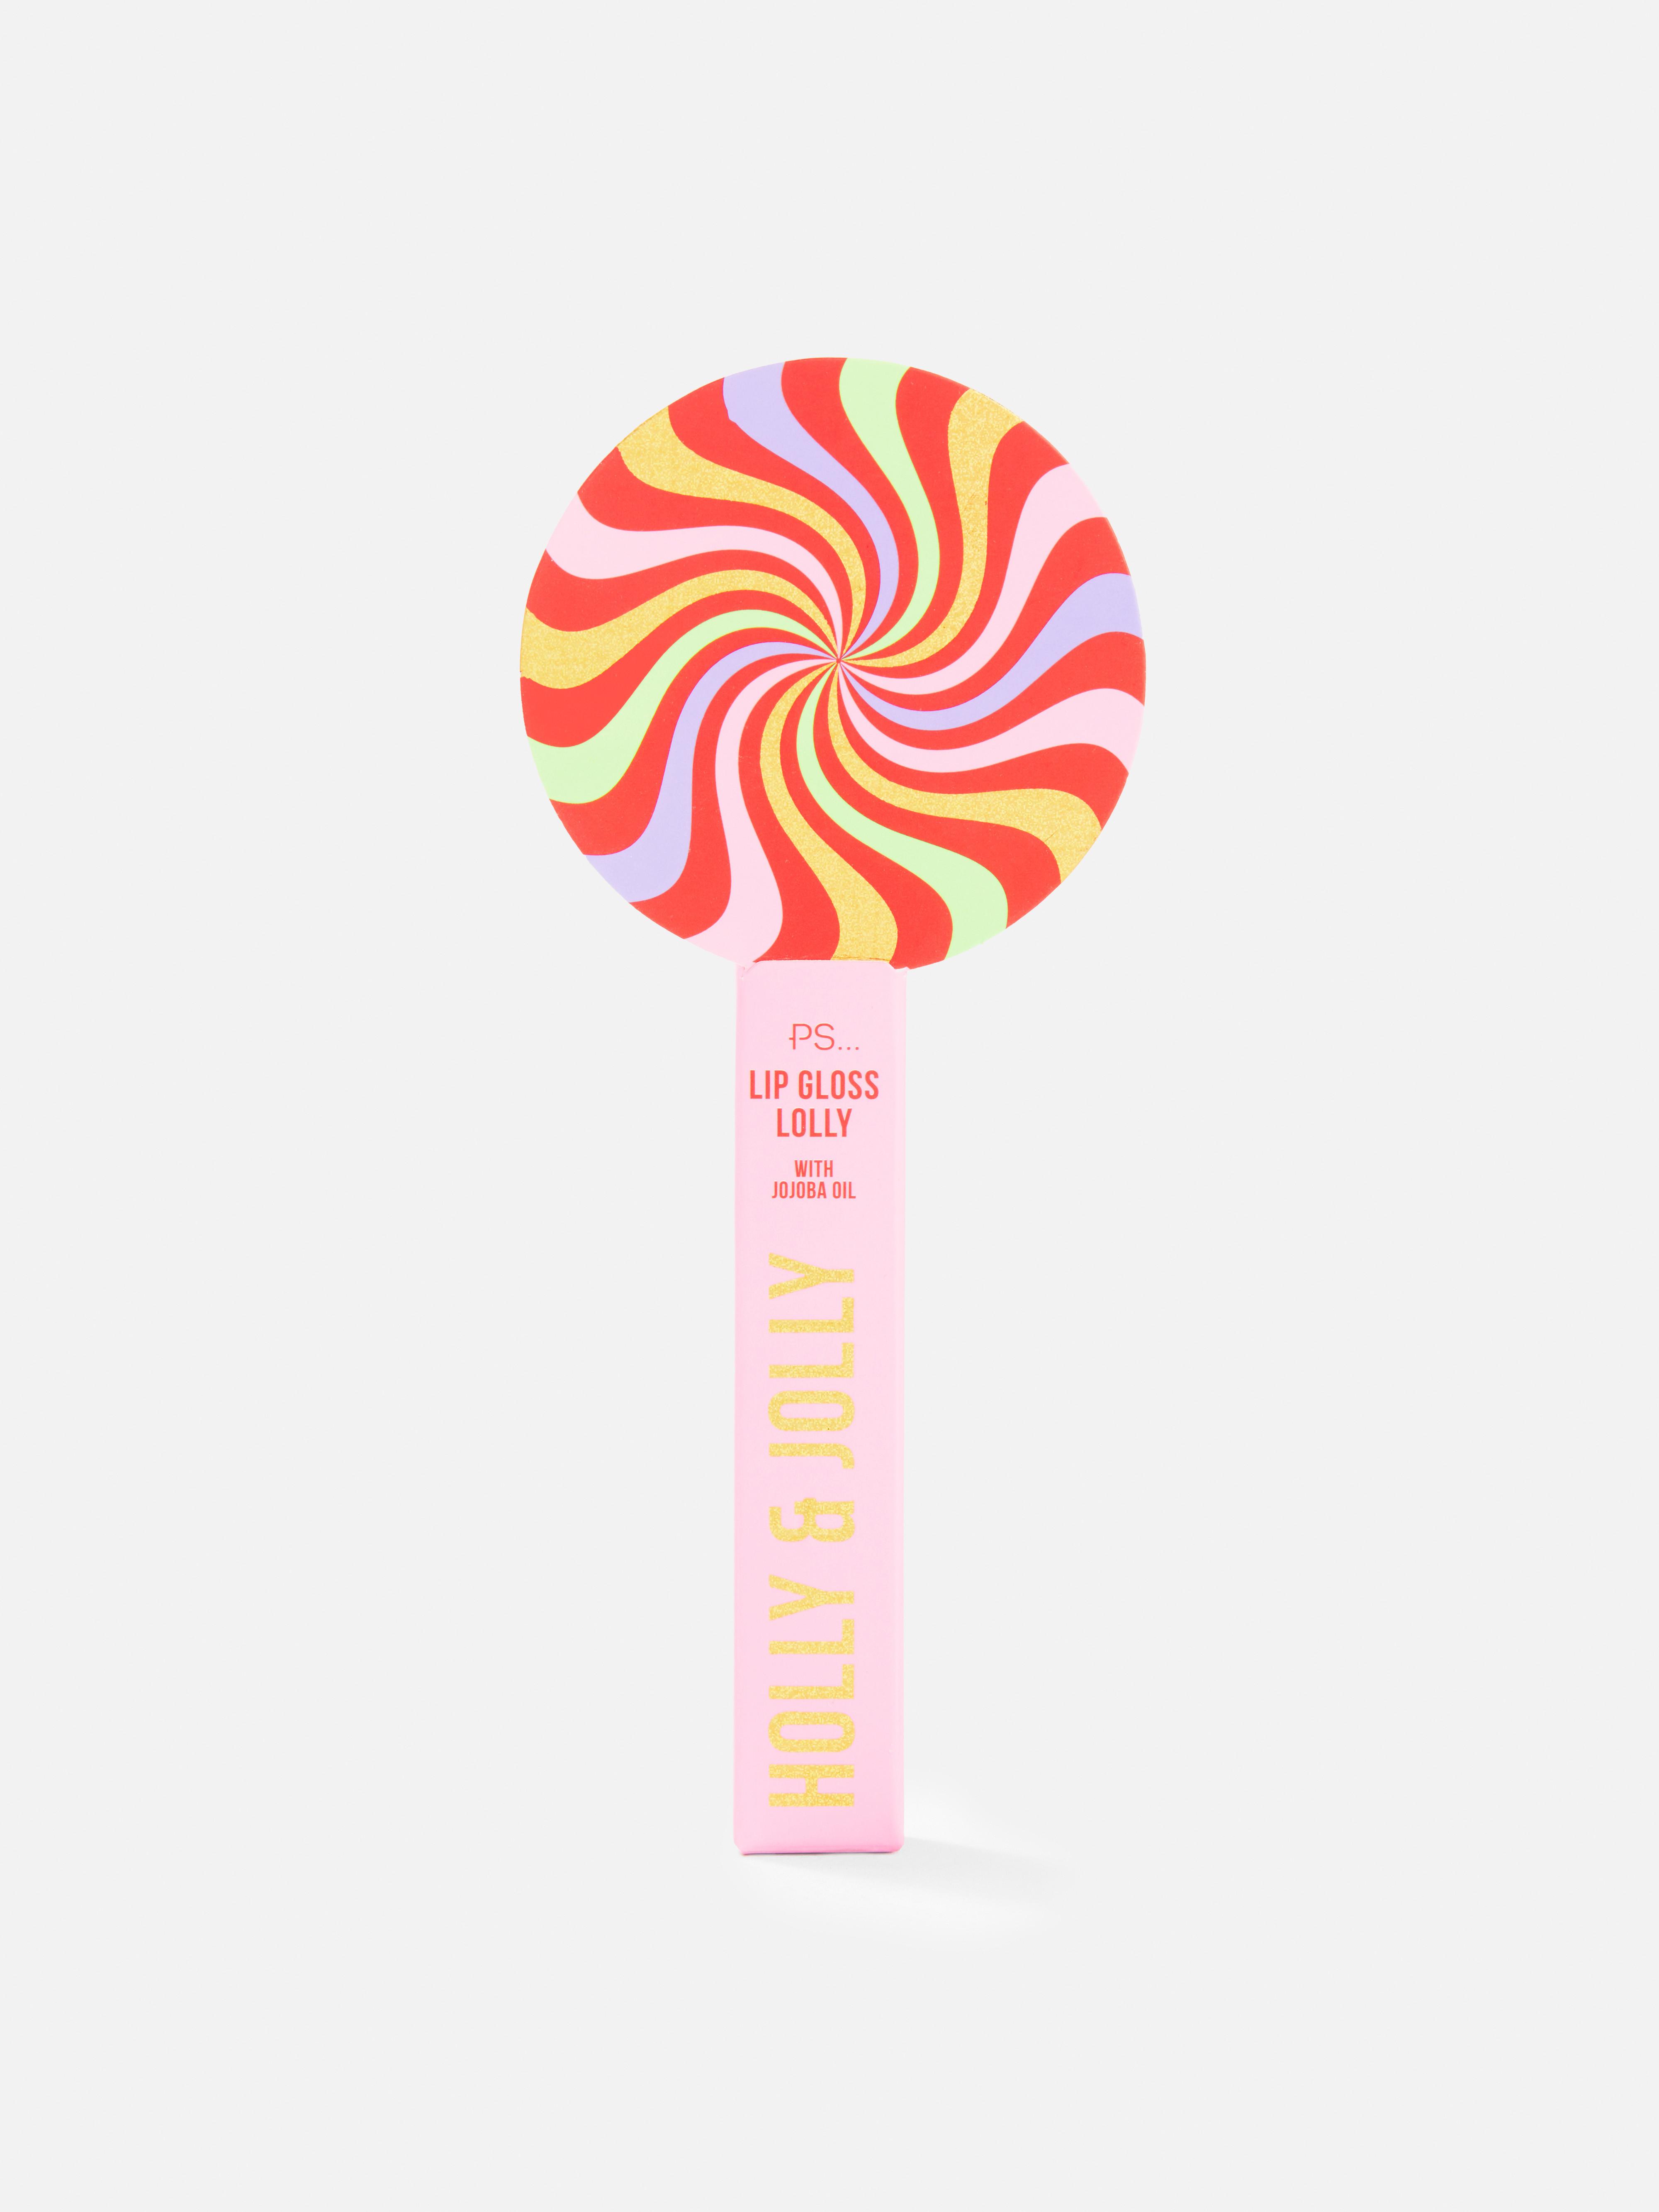 PS… Lollypop Shaped Lip Gloss